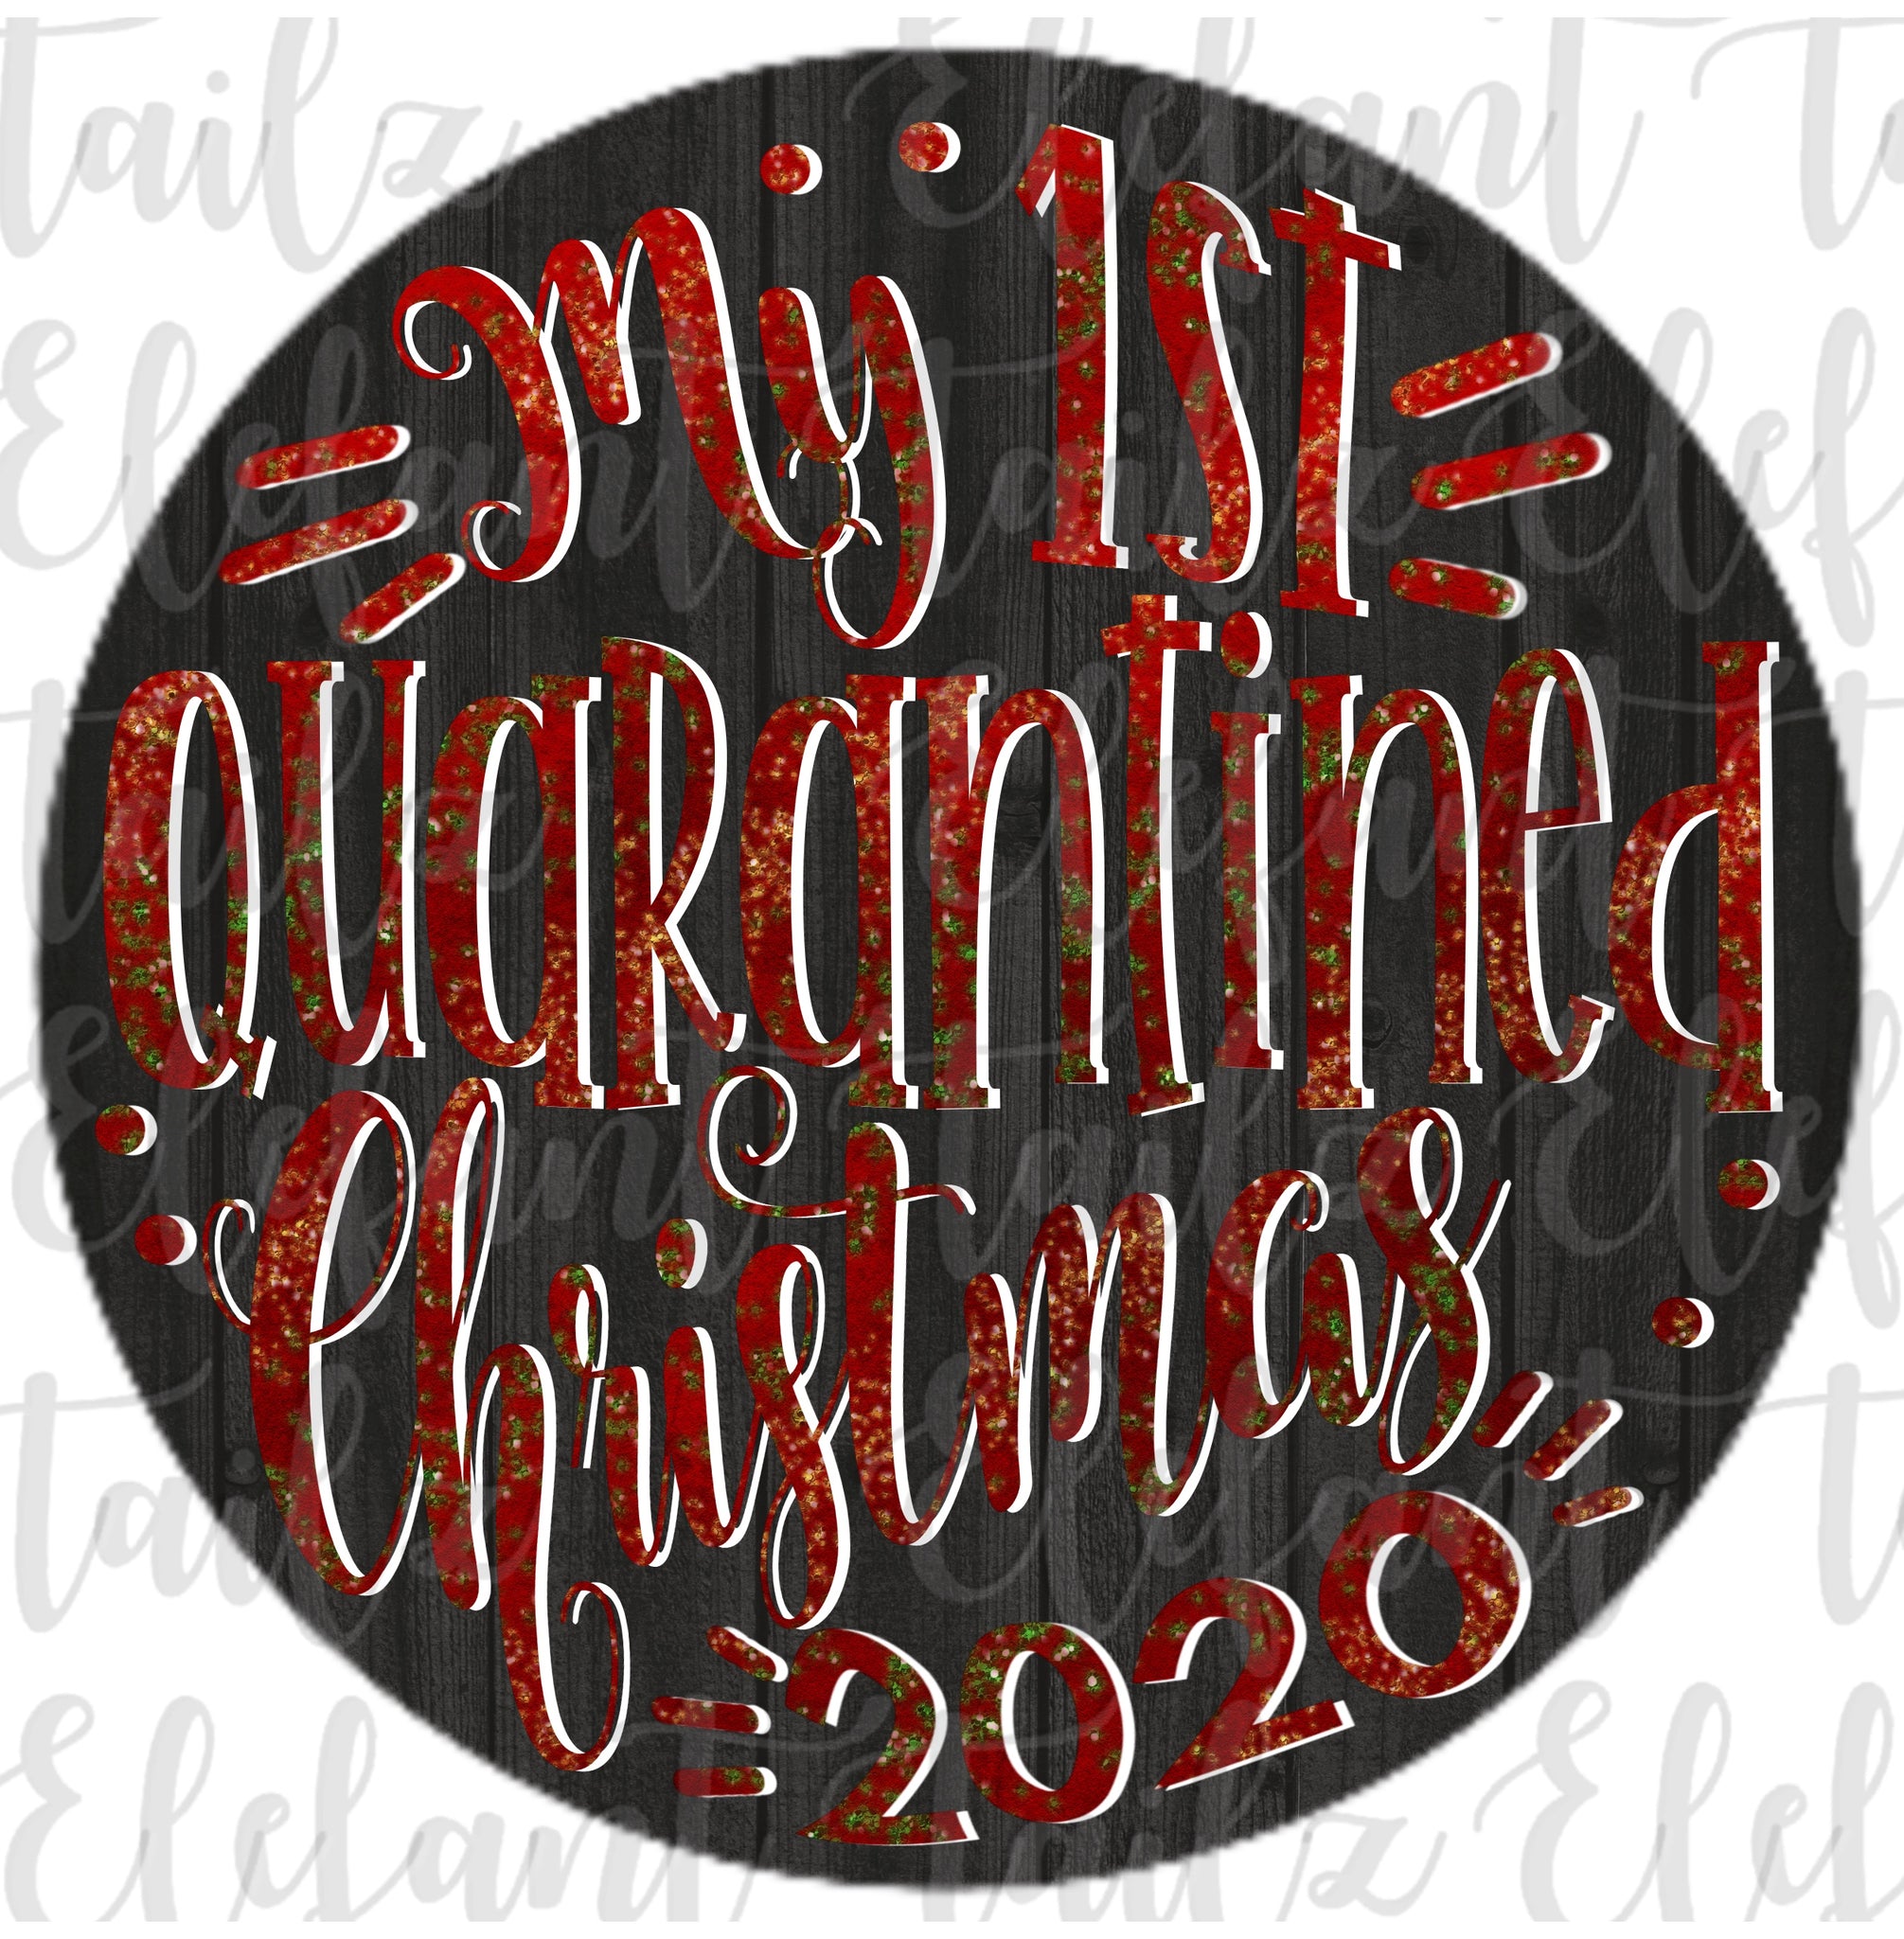 Ornament Rounds - 2020 1st Quarantined Christmas #1